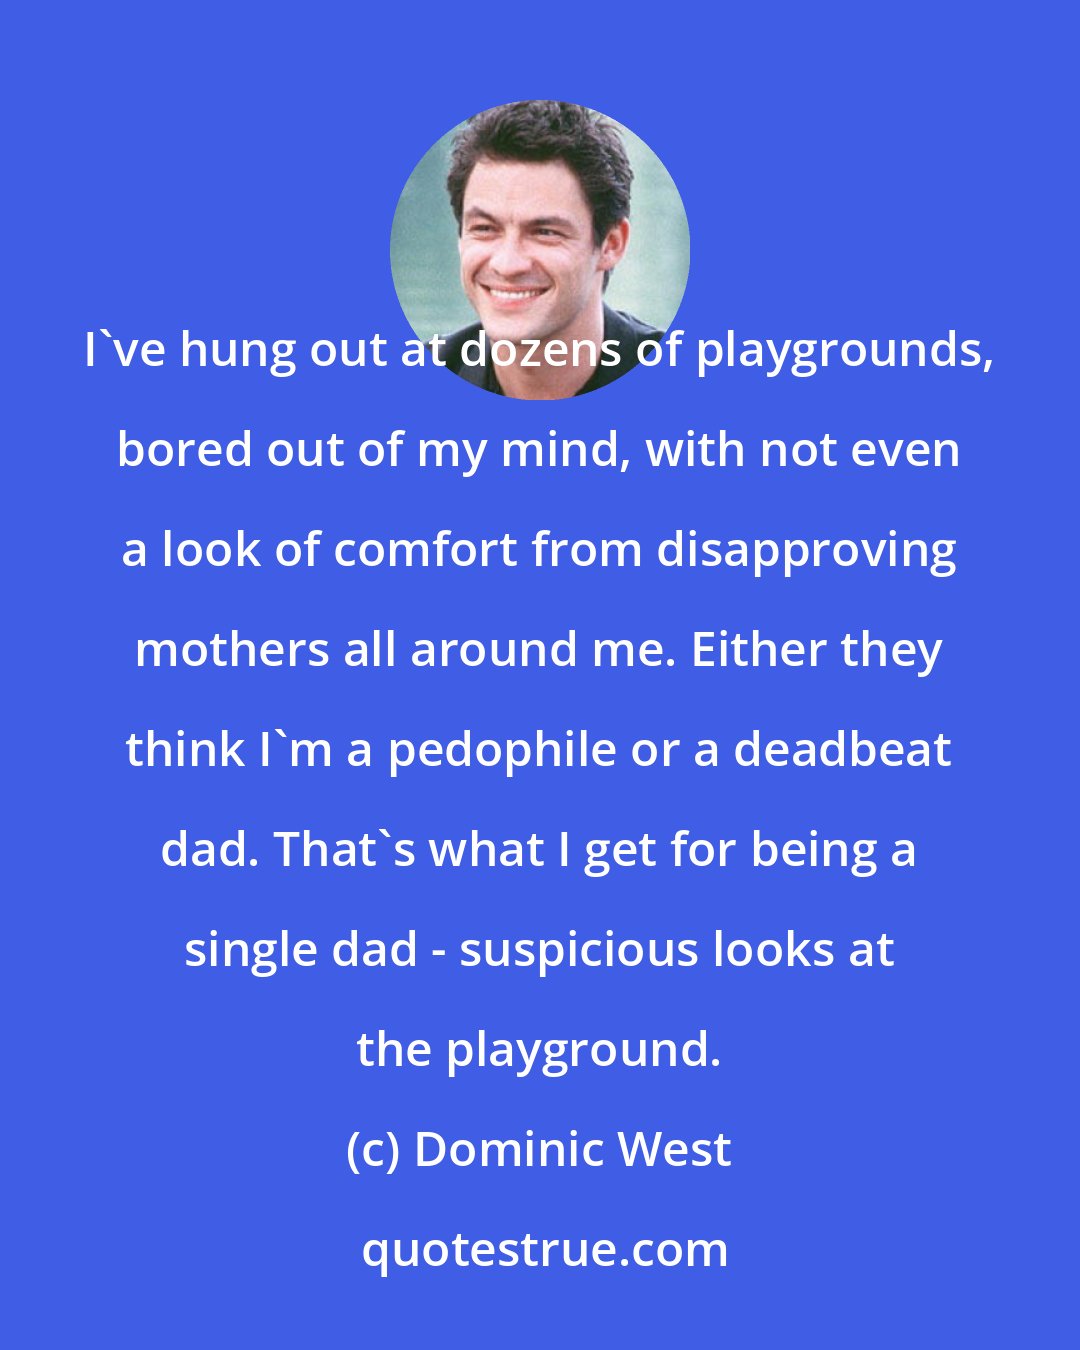 Dominic West: I've hung out at dozens of playgrounds, bored out of my mind, with not even a look of comfort from disapproving mothers all around me. Either they think I'm a pedophile or a deadbeat dad. That's what I get for being a single dad - suspicious looks at the playground.